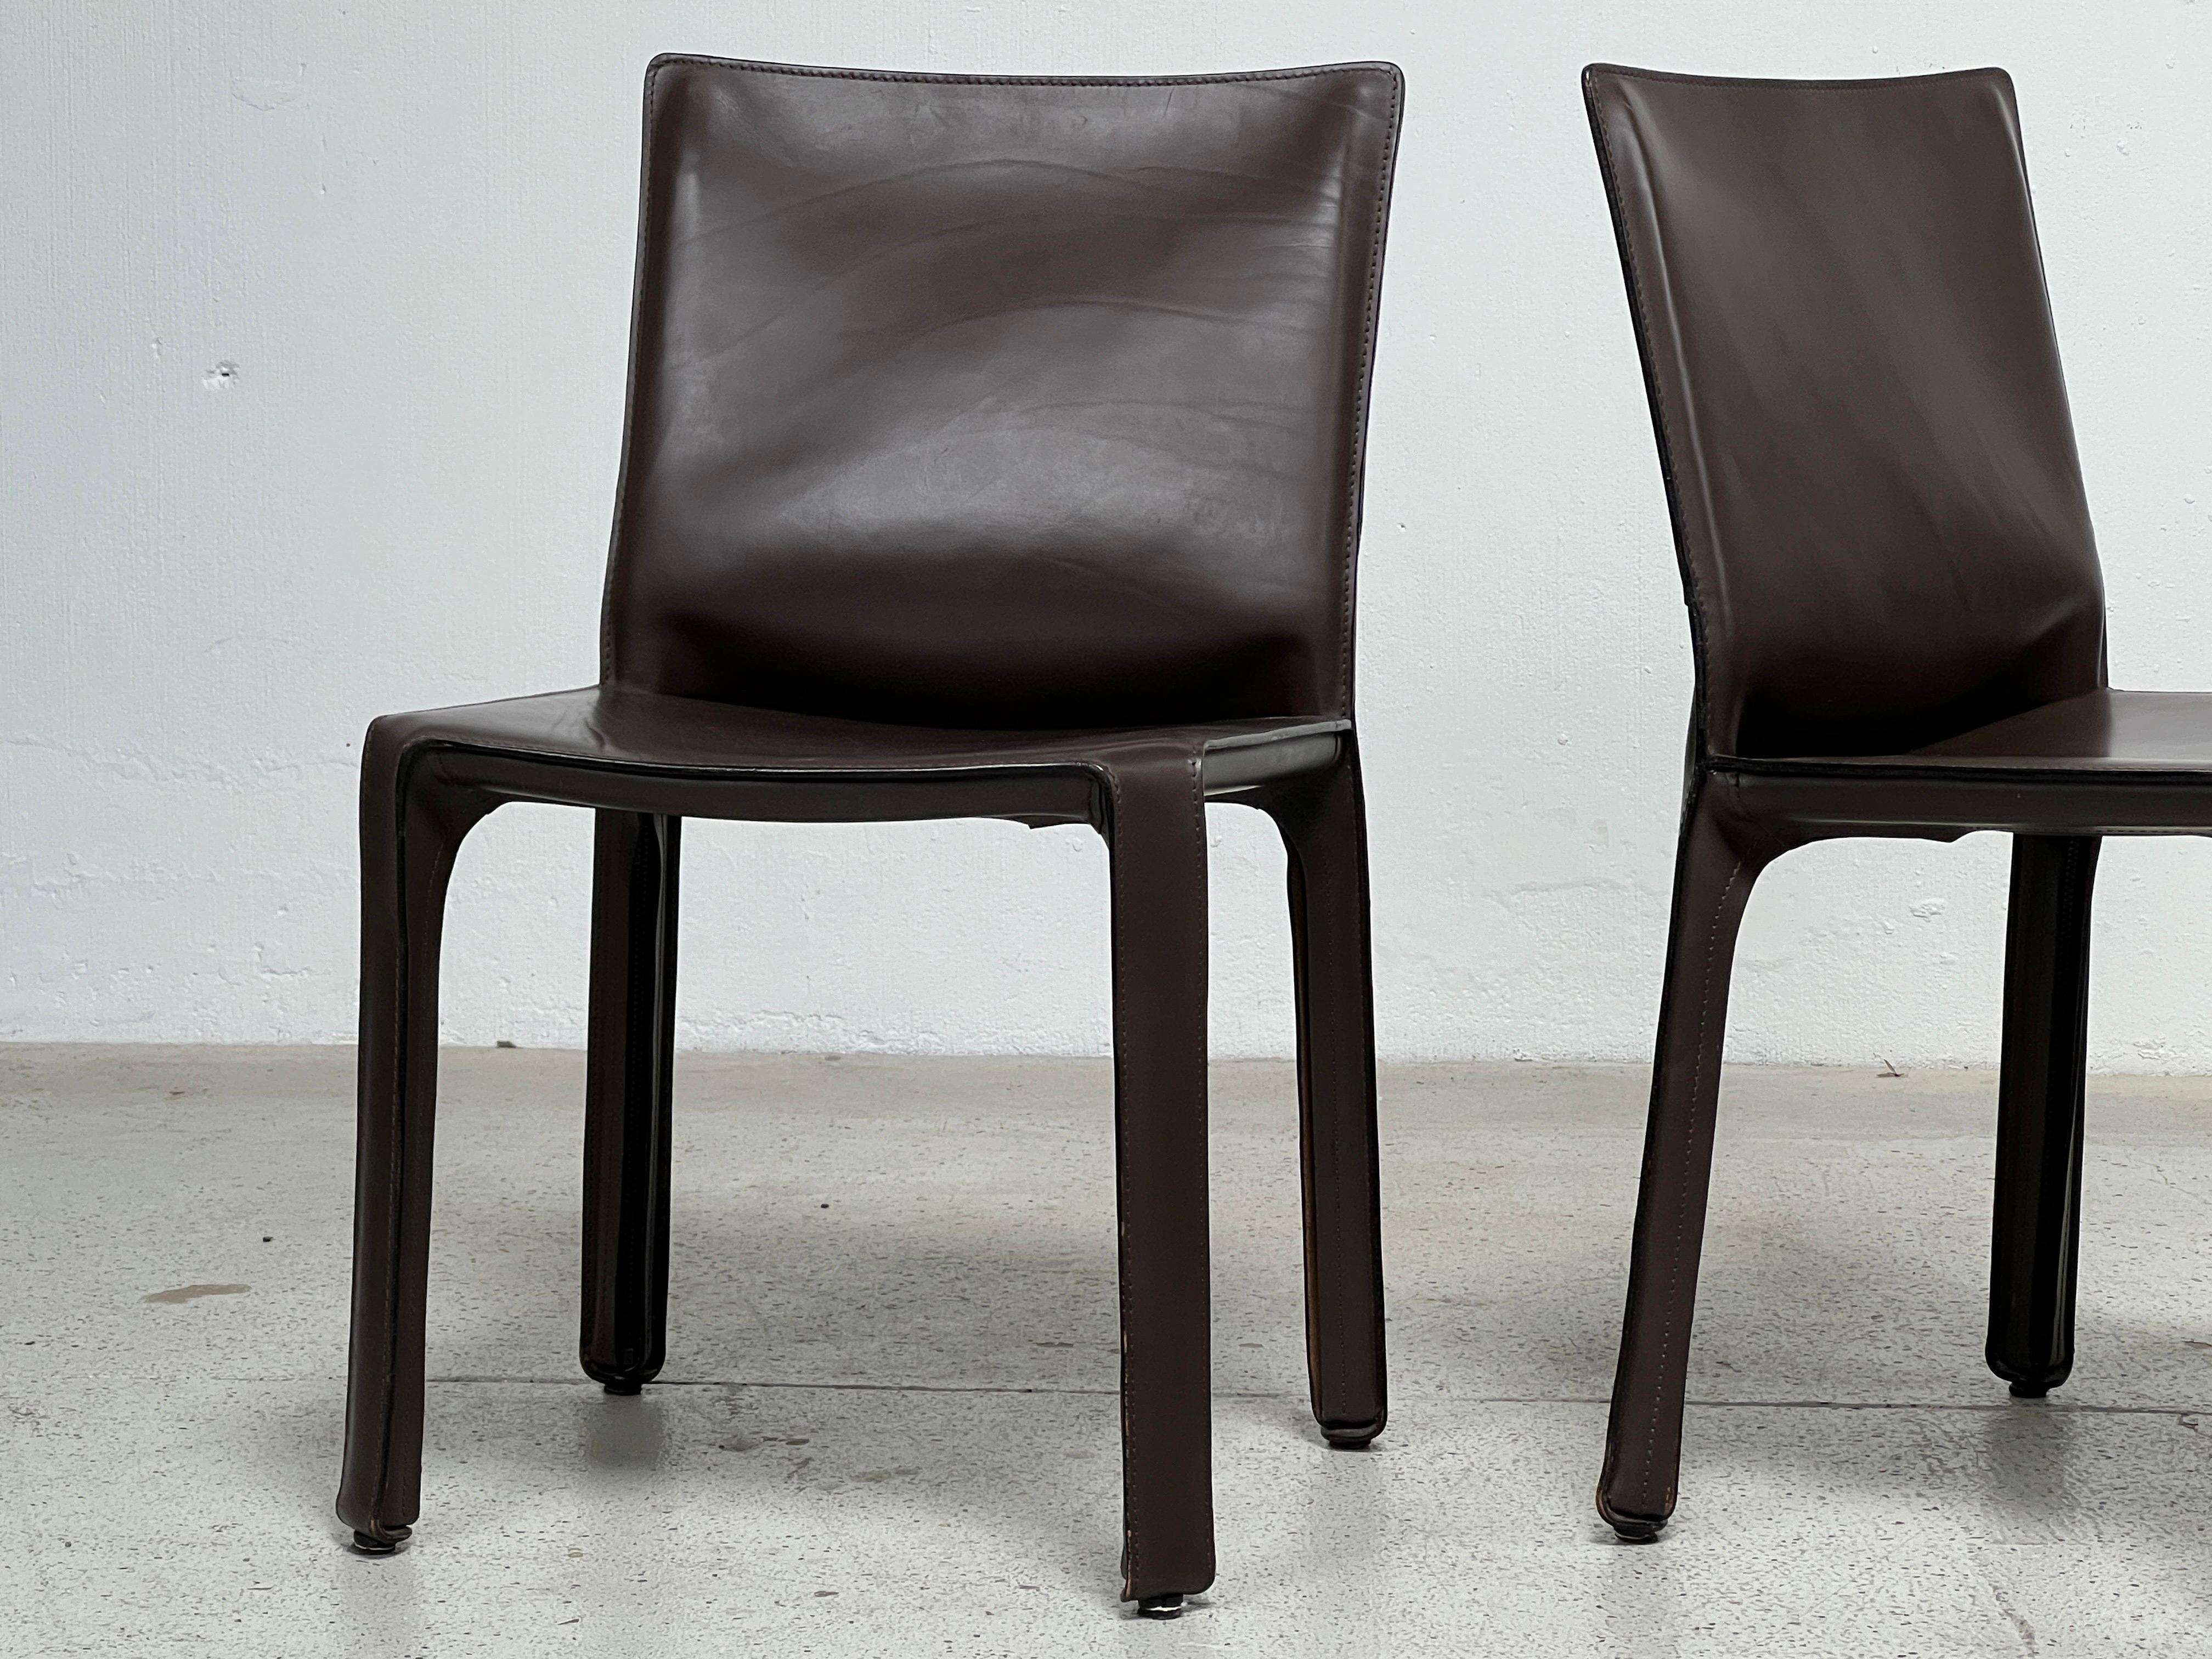 Four Brown Leather Cab Chairs by Mario Bellini  For Sale 5